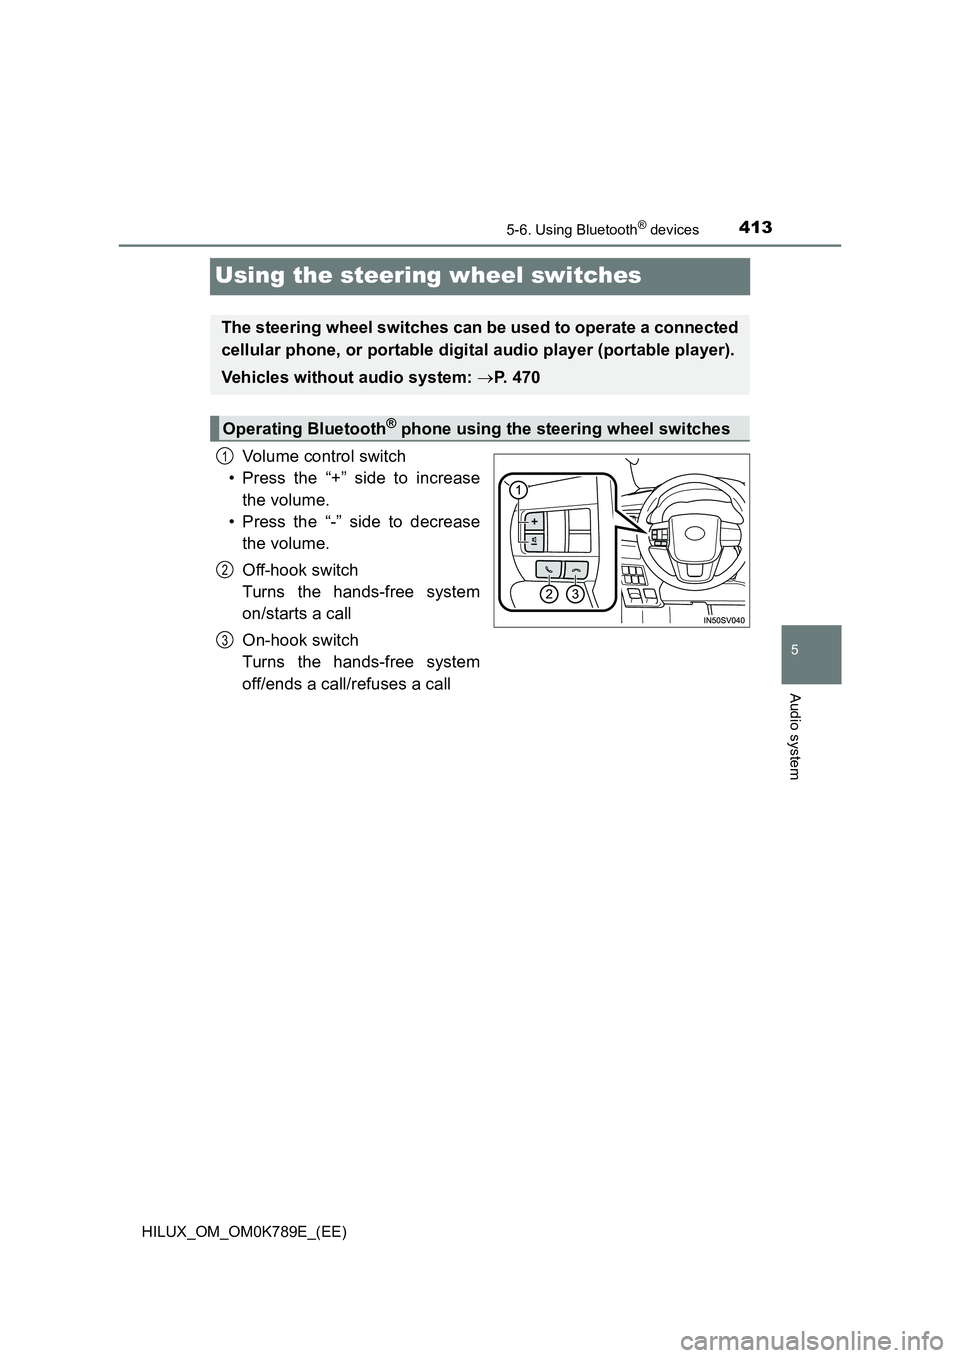 TOYOTA HILUX 2023  Owners Manual 413
5
5-6. Using Bluetooth® devices
Audio system
HILUX_OM_OM0K789E_(EE)
Using the steering wheel switches
Volume control switch 
• Press the “+” side to increase 
the volume. 
• Press the “